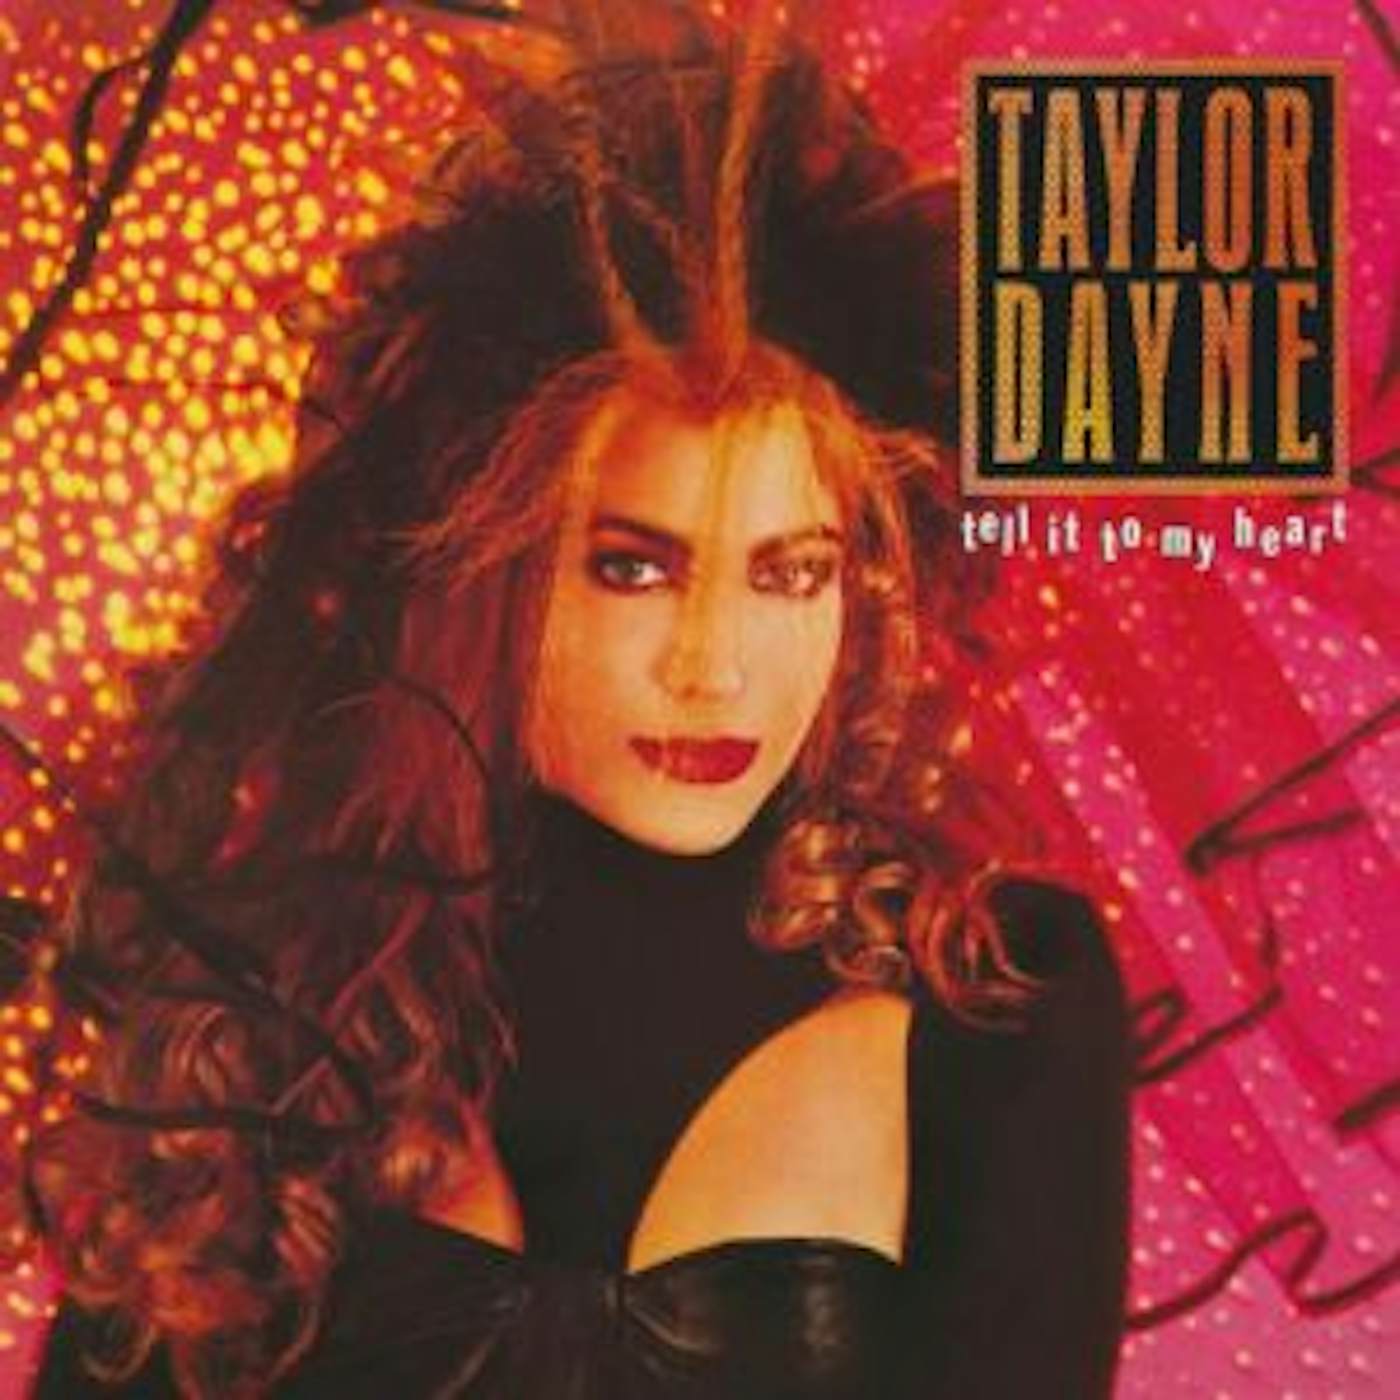 Taylor Dayne TELL IT TO MY HEART: DELUXE EDITION CD